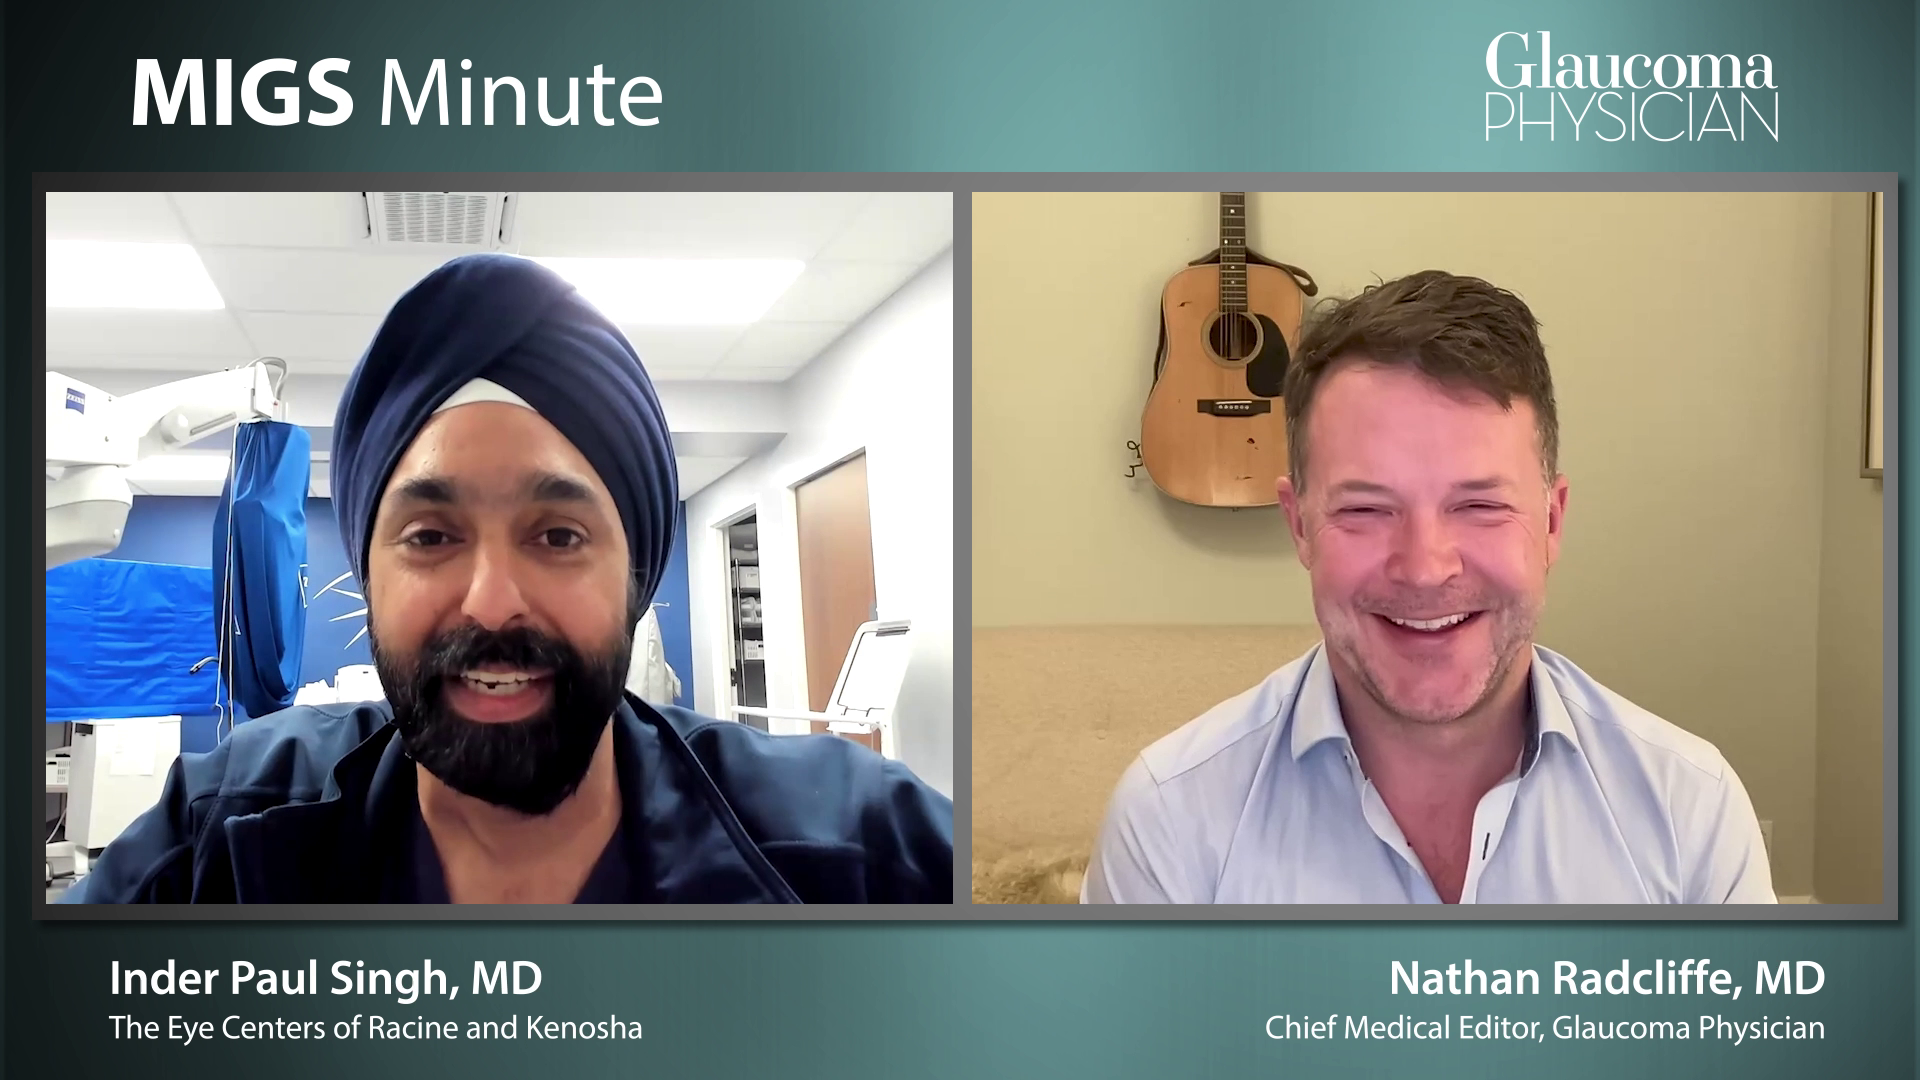 Episode 16: Inder Paul Singh, MD, and Nathan Radcliffe, MD, discuss the window of opportunity in glaucoma.